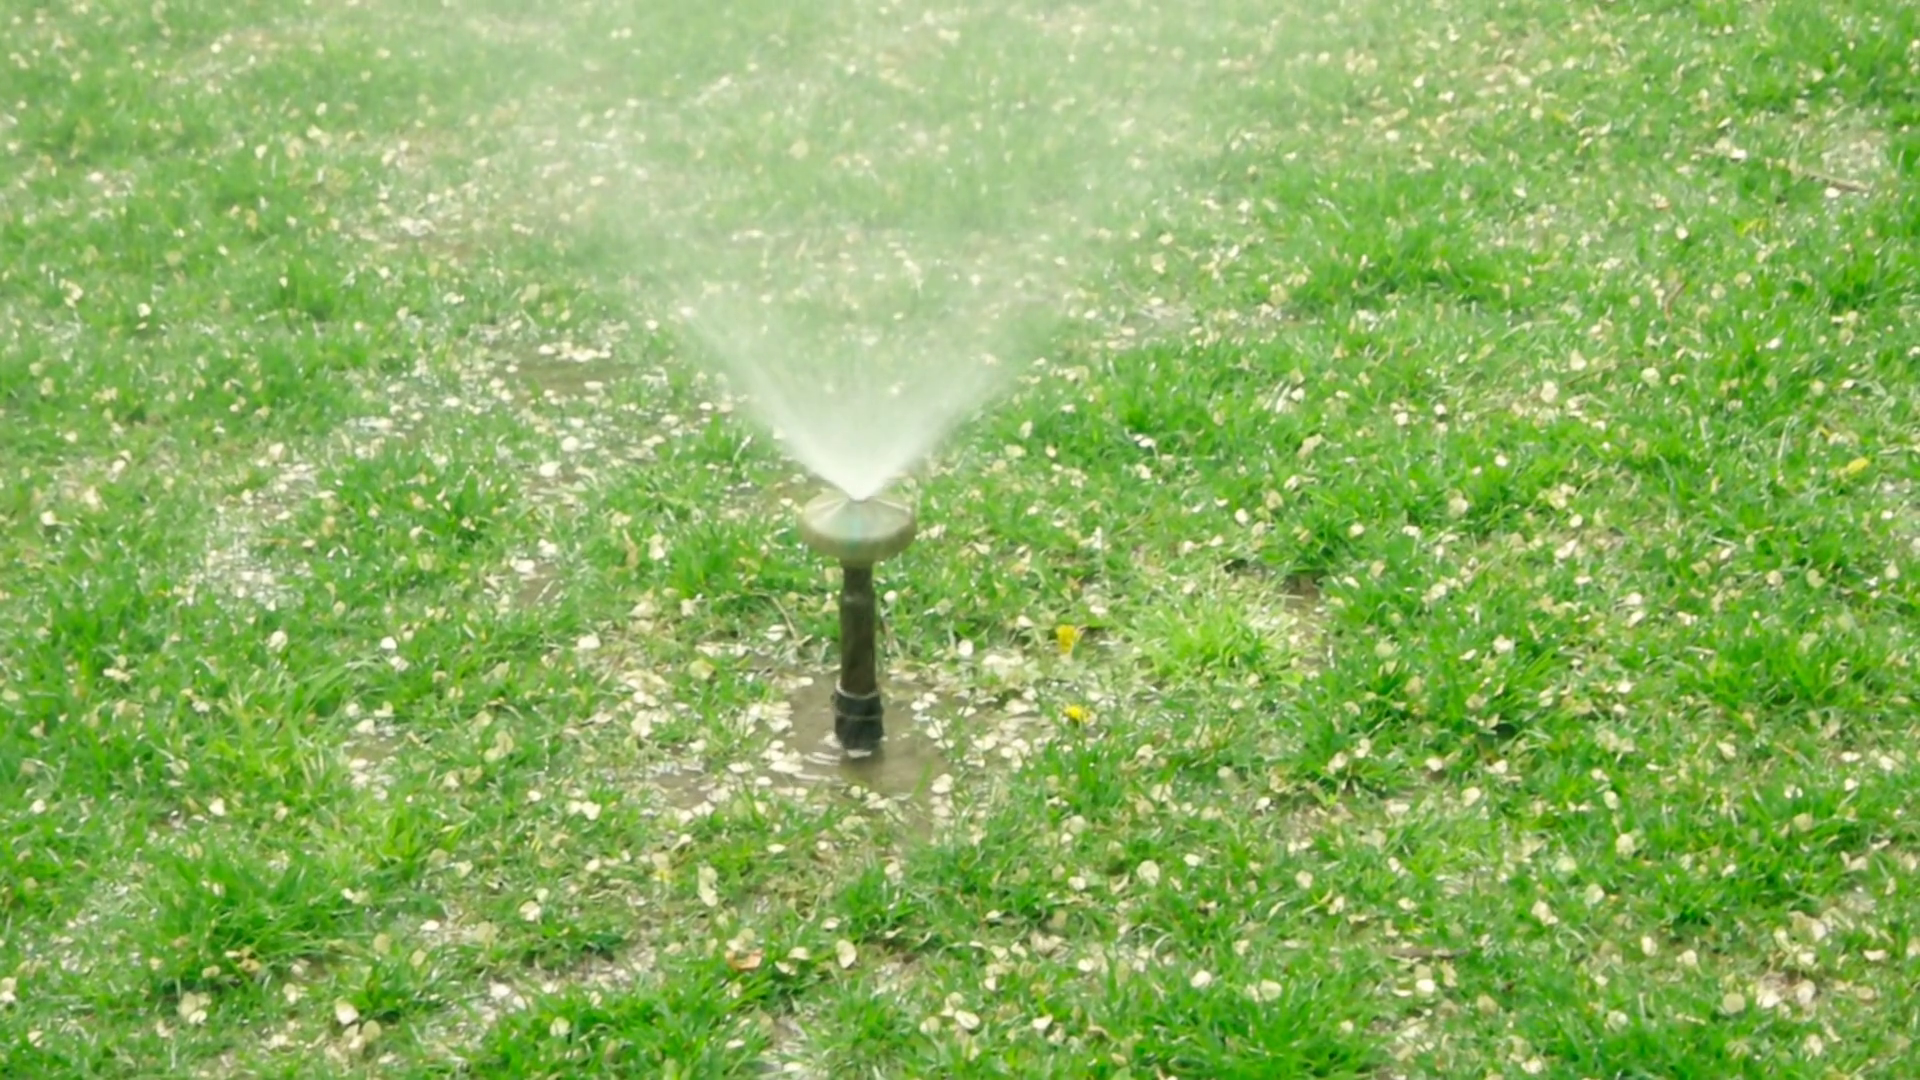 Water sprinkler spread over lawn with dog spots. Garden grass ...